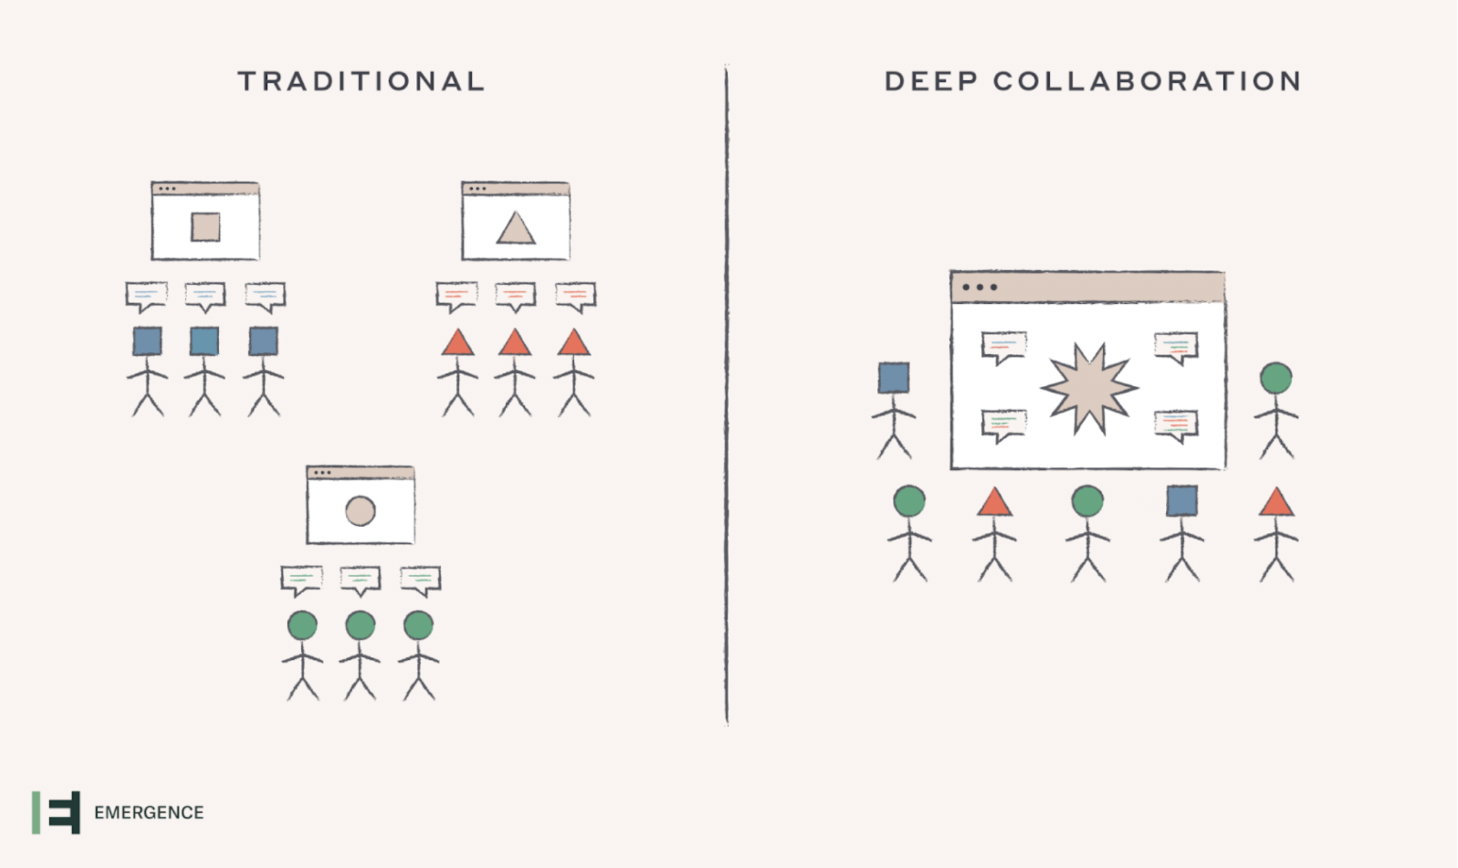 Deep collaboration software enables multi-user collaboration in one platform